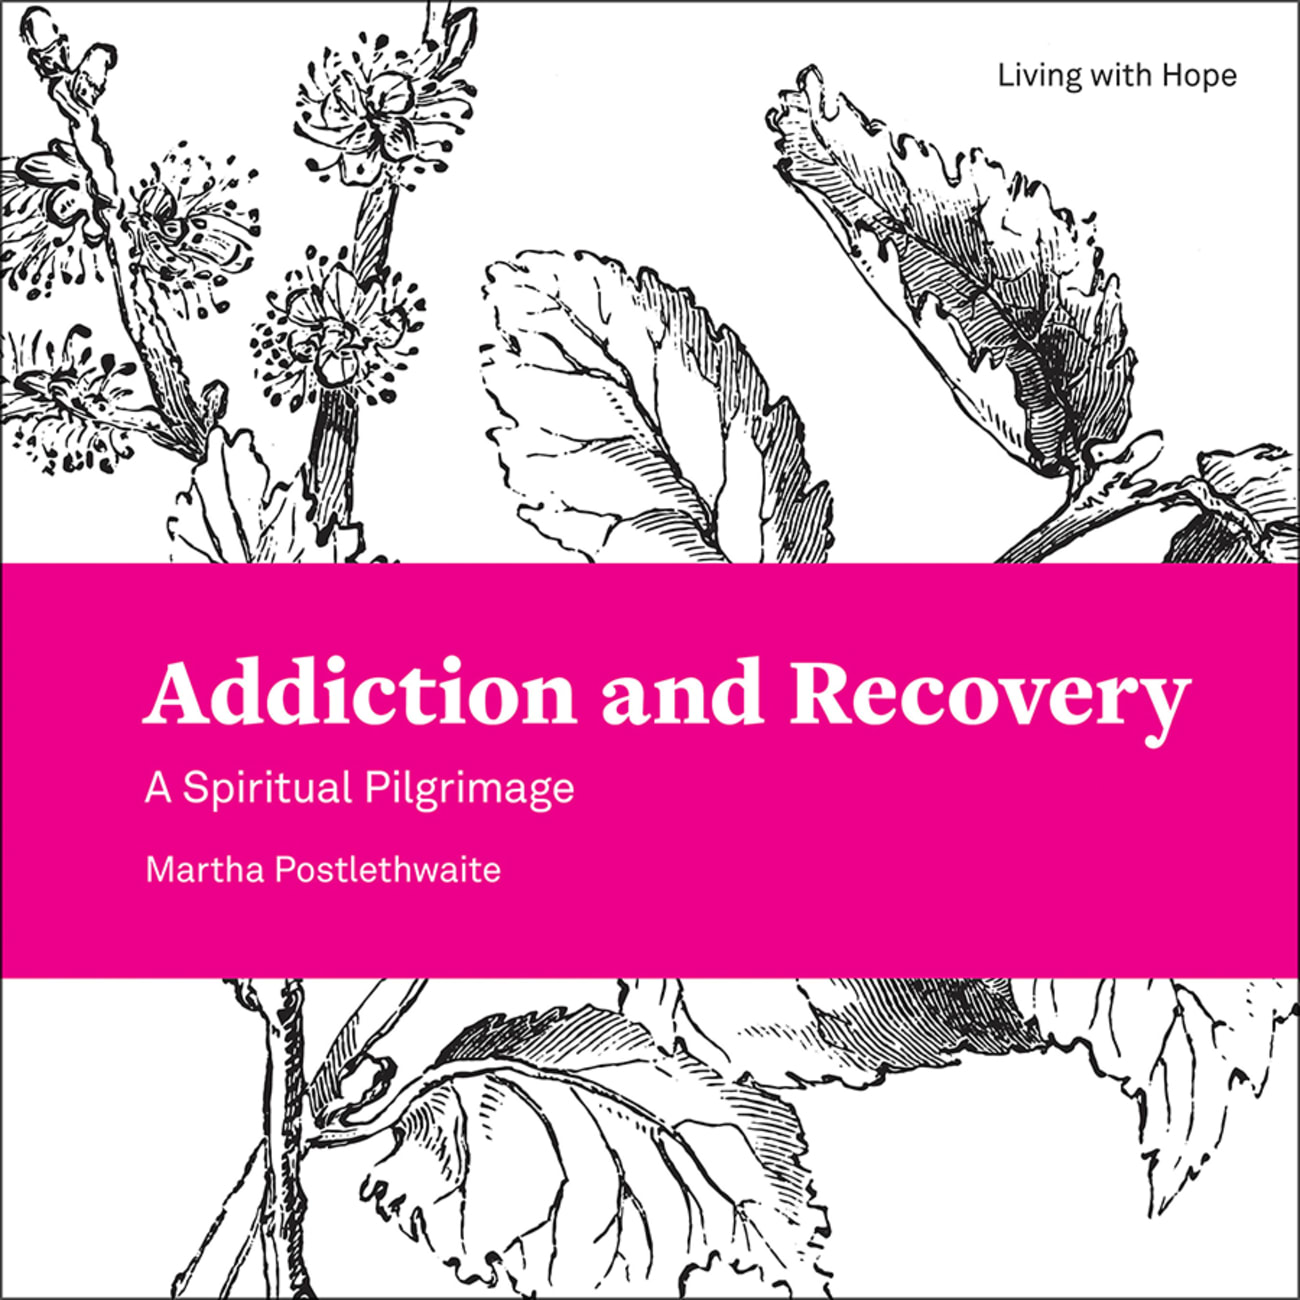 Addiction and Recovery: A Spiritual Pilgrimage (Living With Hope Series) Paperback